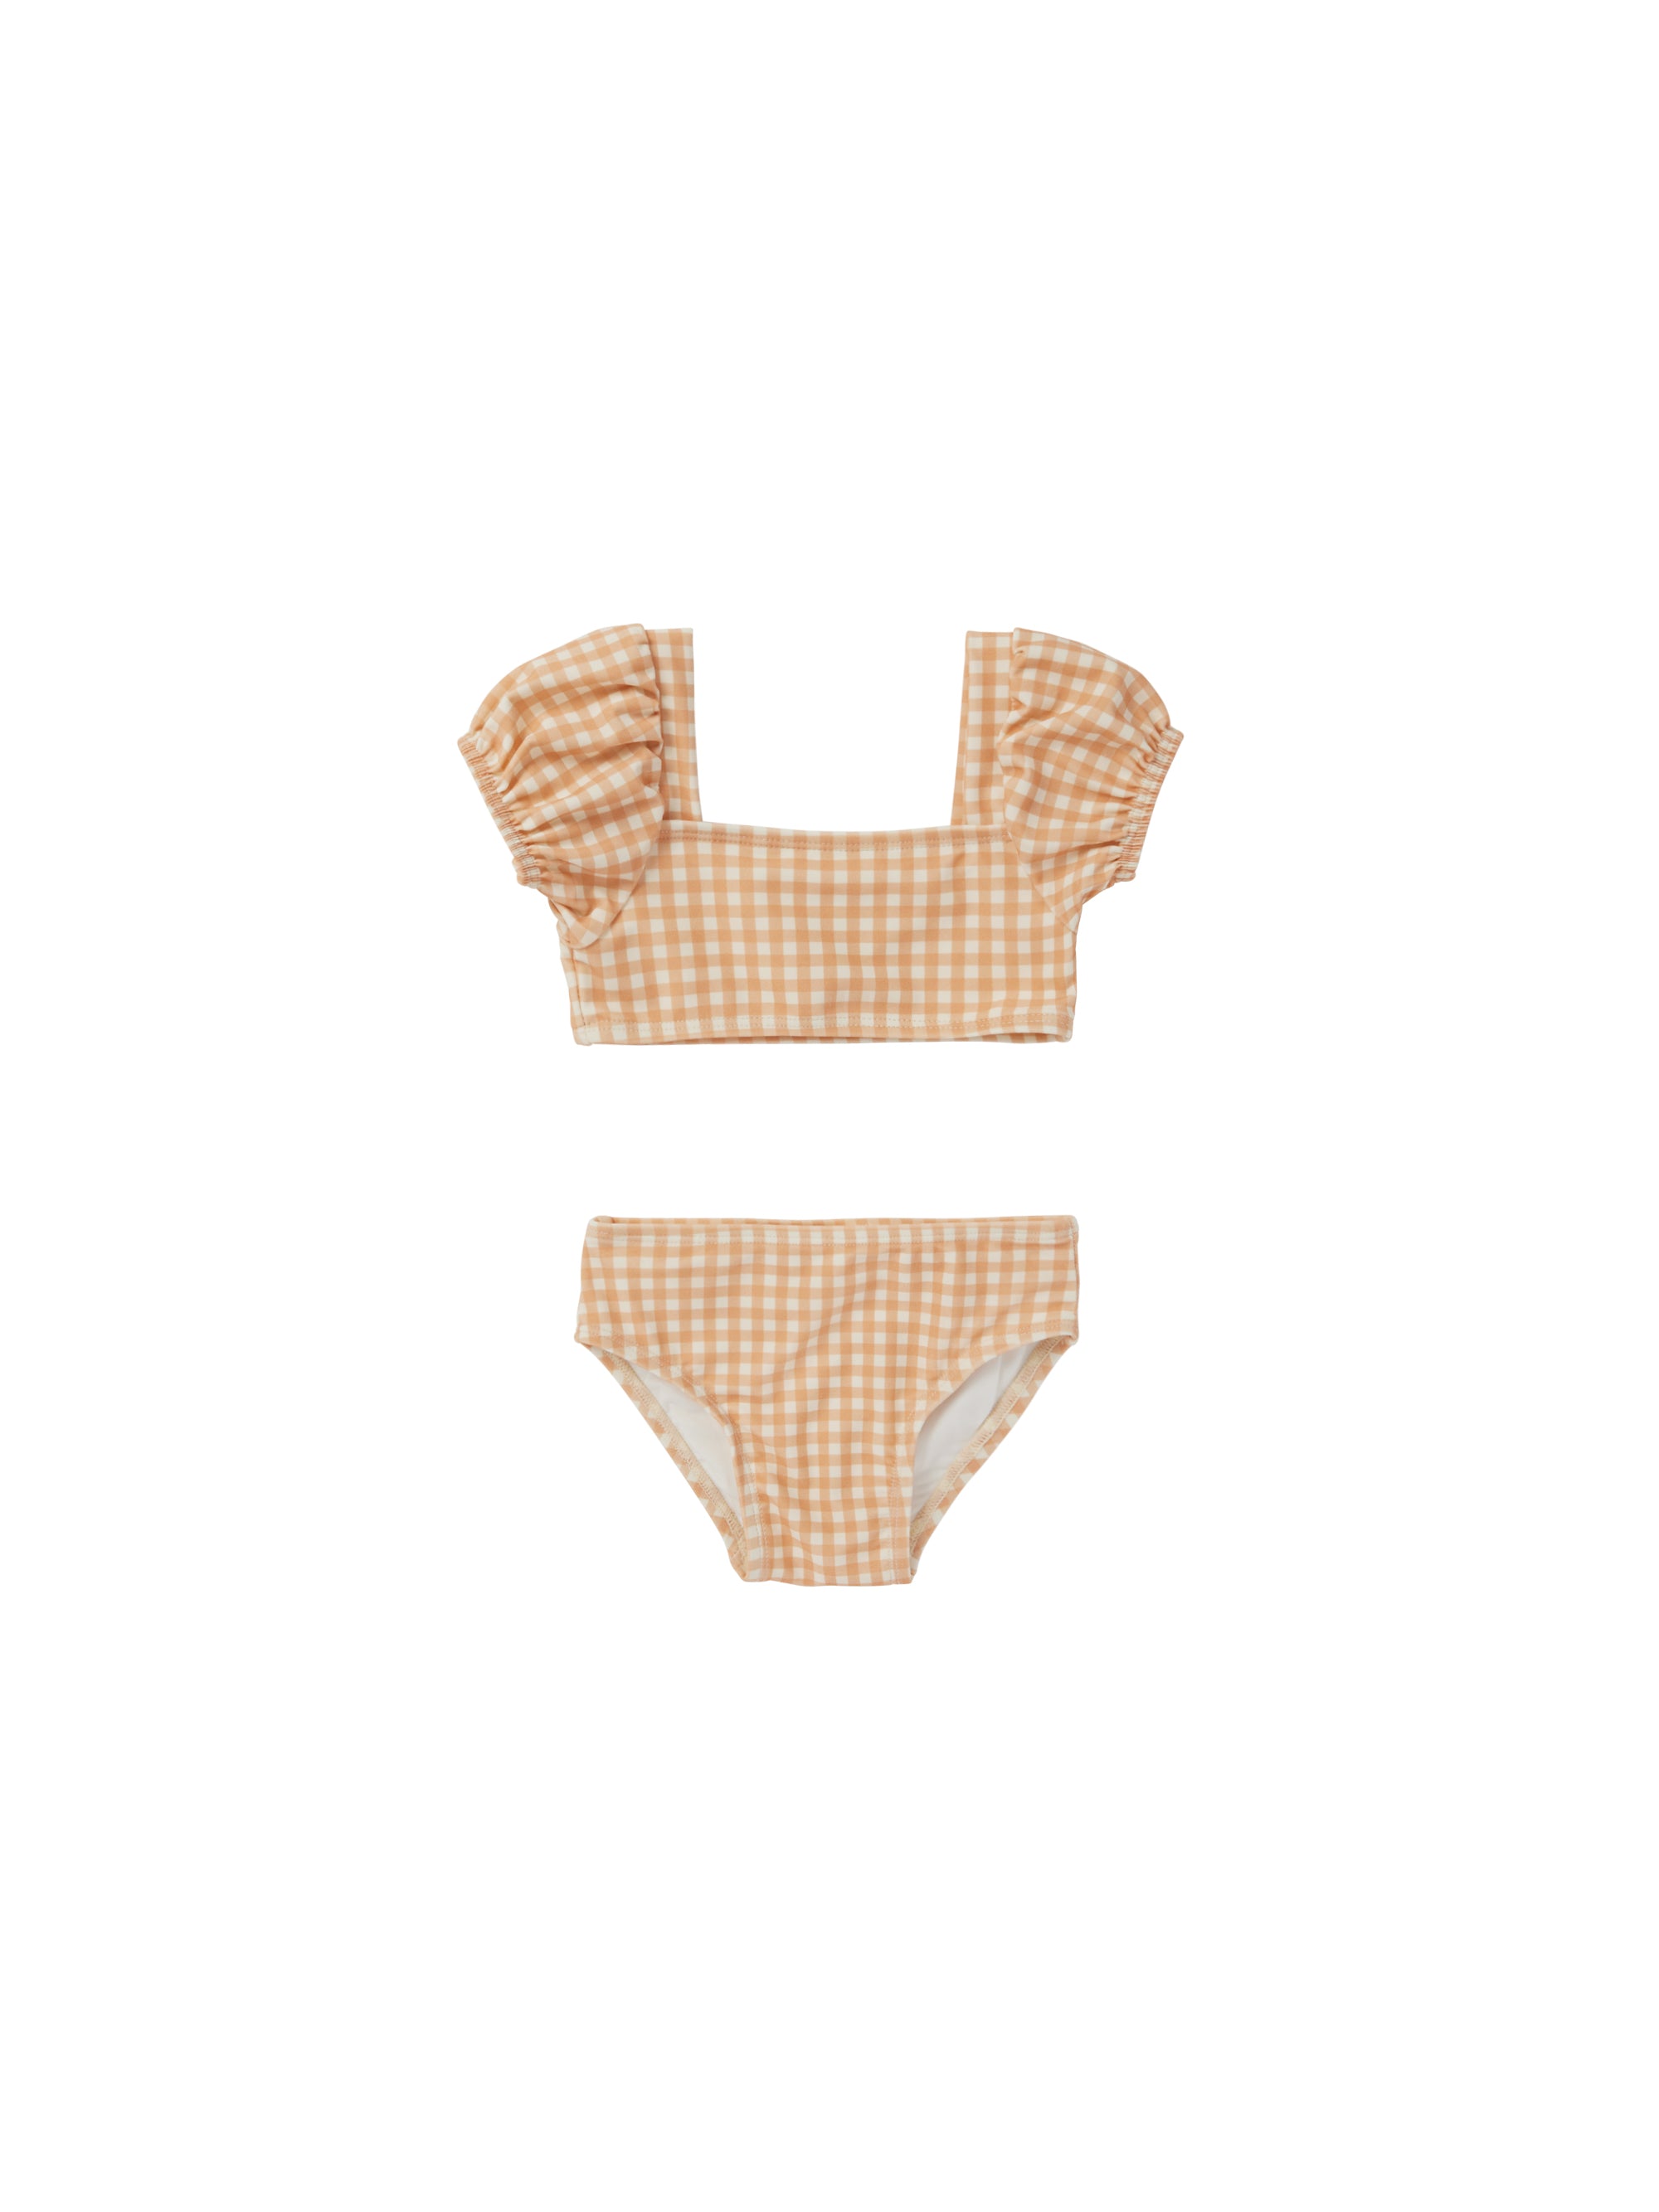 Quincy Mae Zippy Two-Piece Melon Gingham